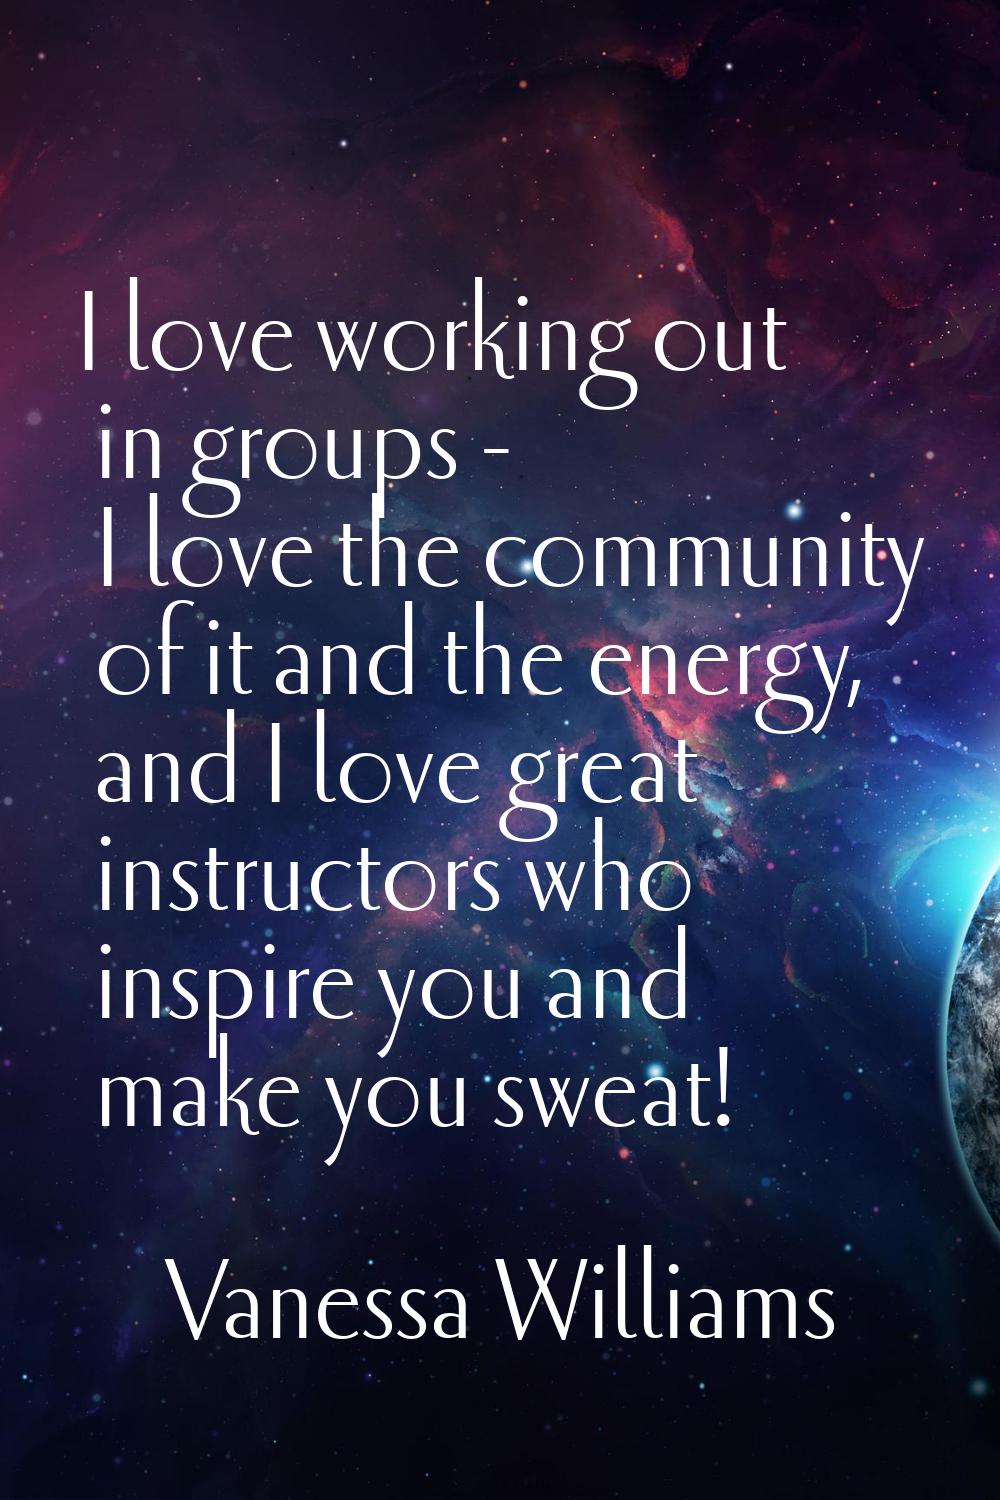 I love working out in groups - I love the community of it and the energy, and I love great instruct